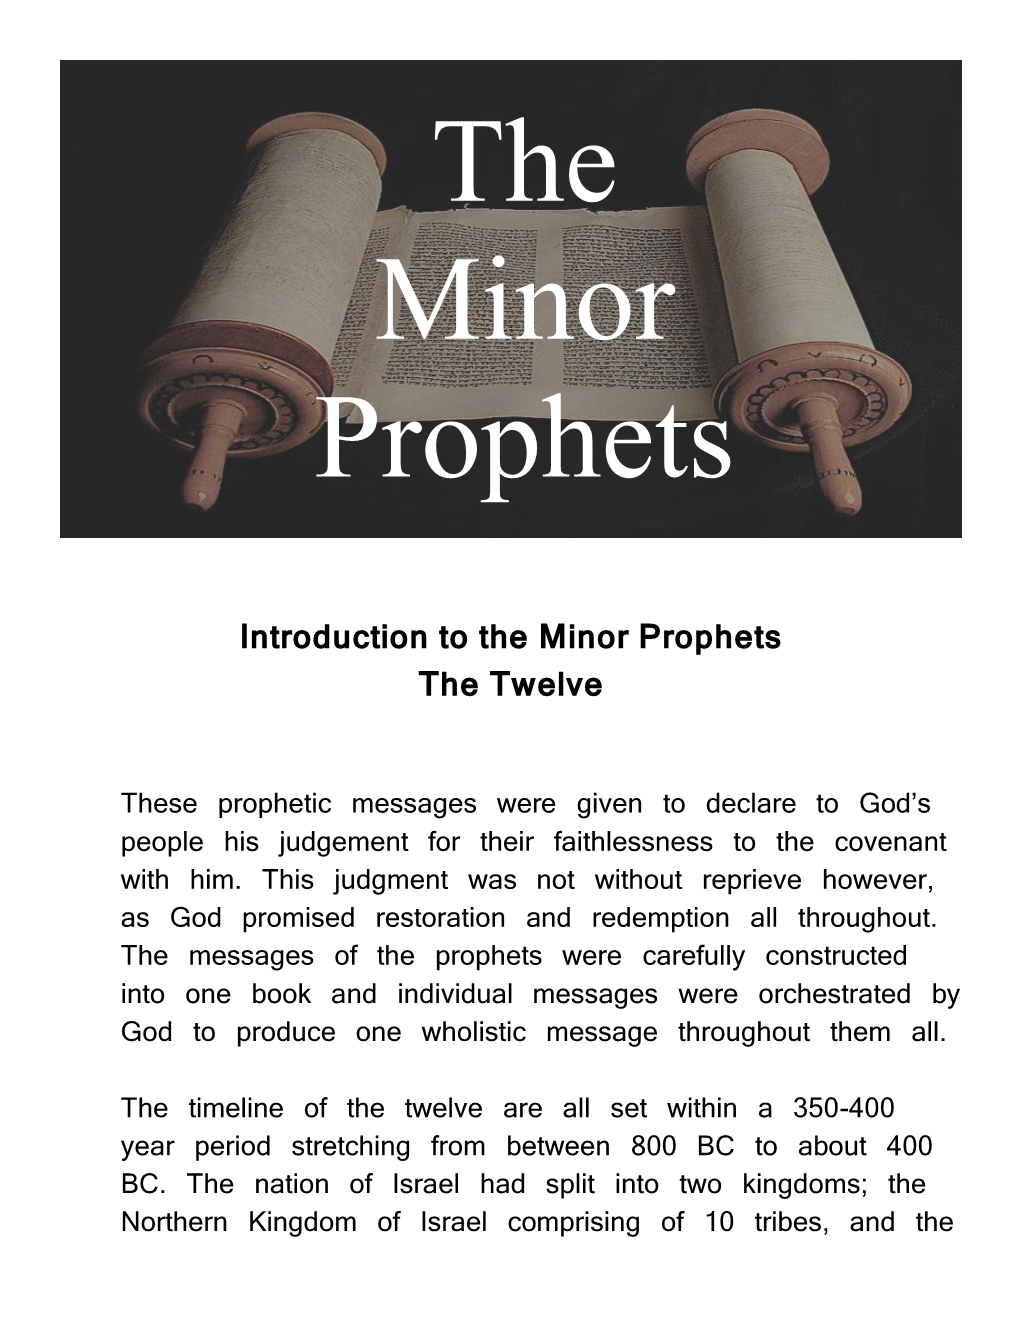 Introduction to the Minor Prophets the Twelve